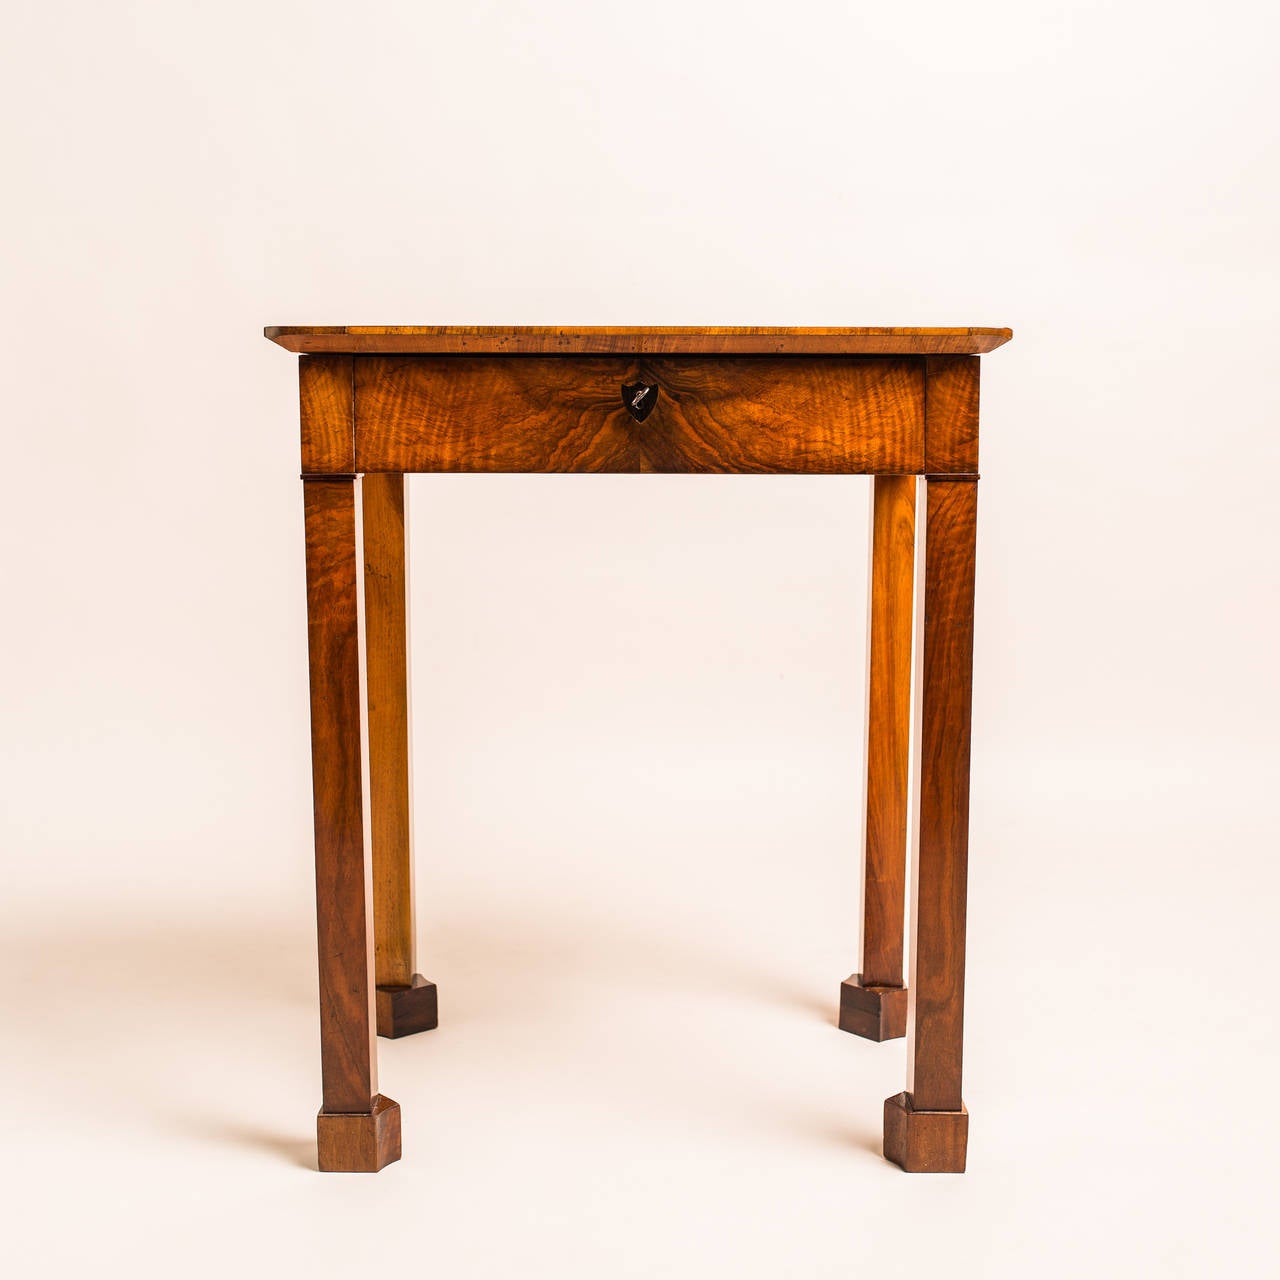 Originating from around 1830, this attractive rare Biedermeier Side Table features simplicity, elegance and beautifully crafted surfaces reminiscent of a “Danhauser” concept. This small table was constructed from spruce wood with a striking walnut